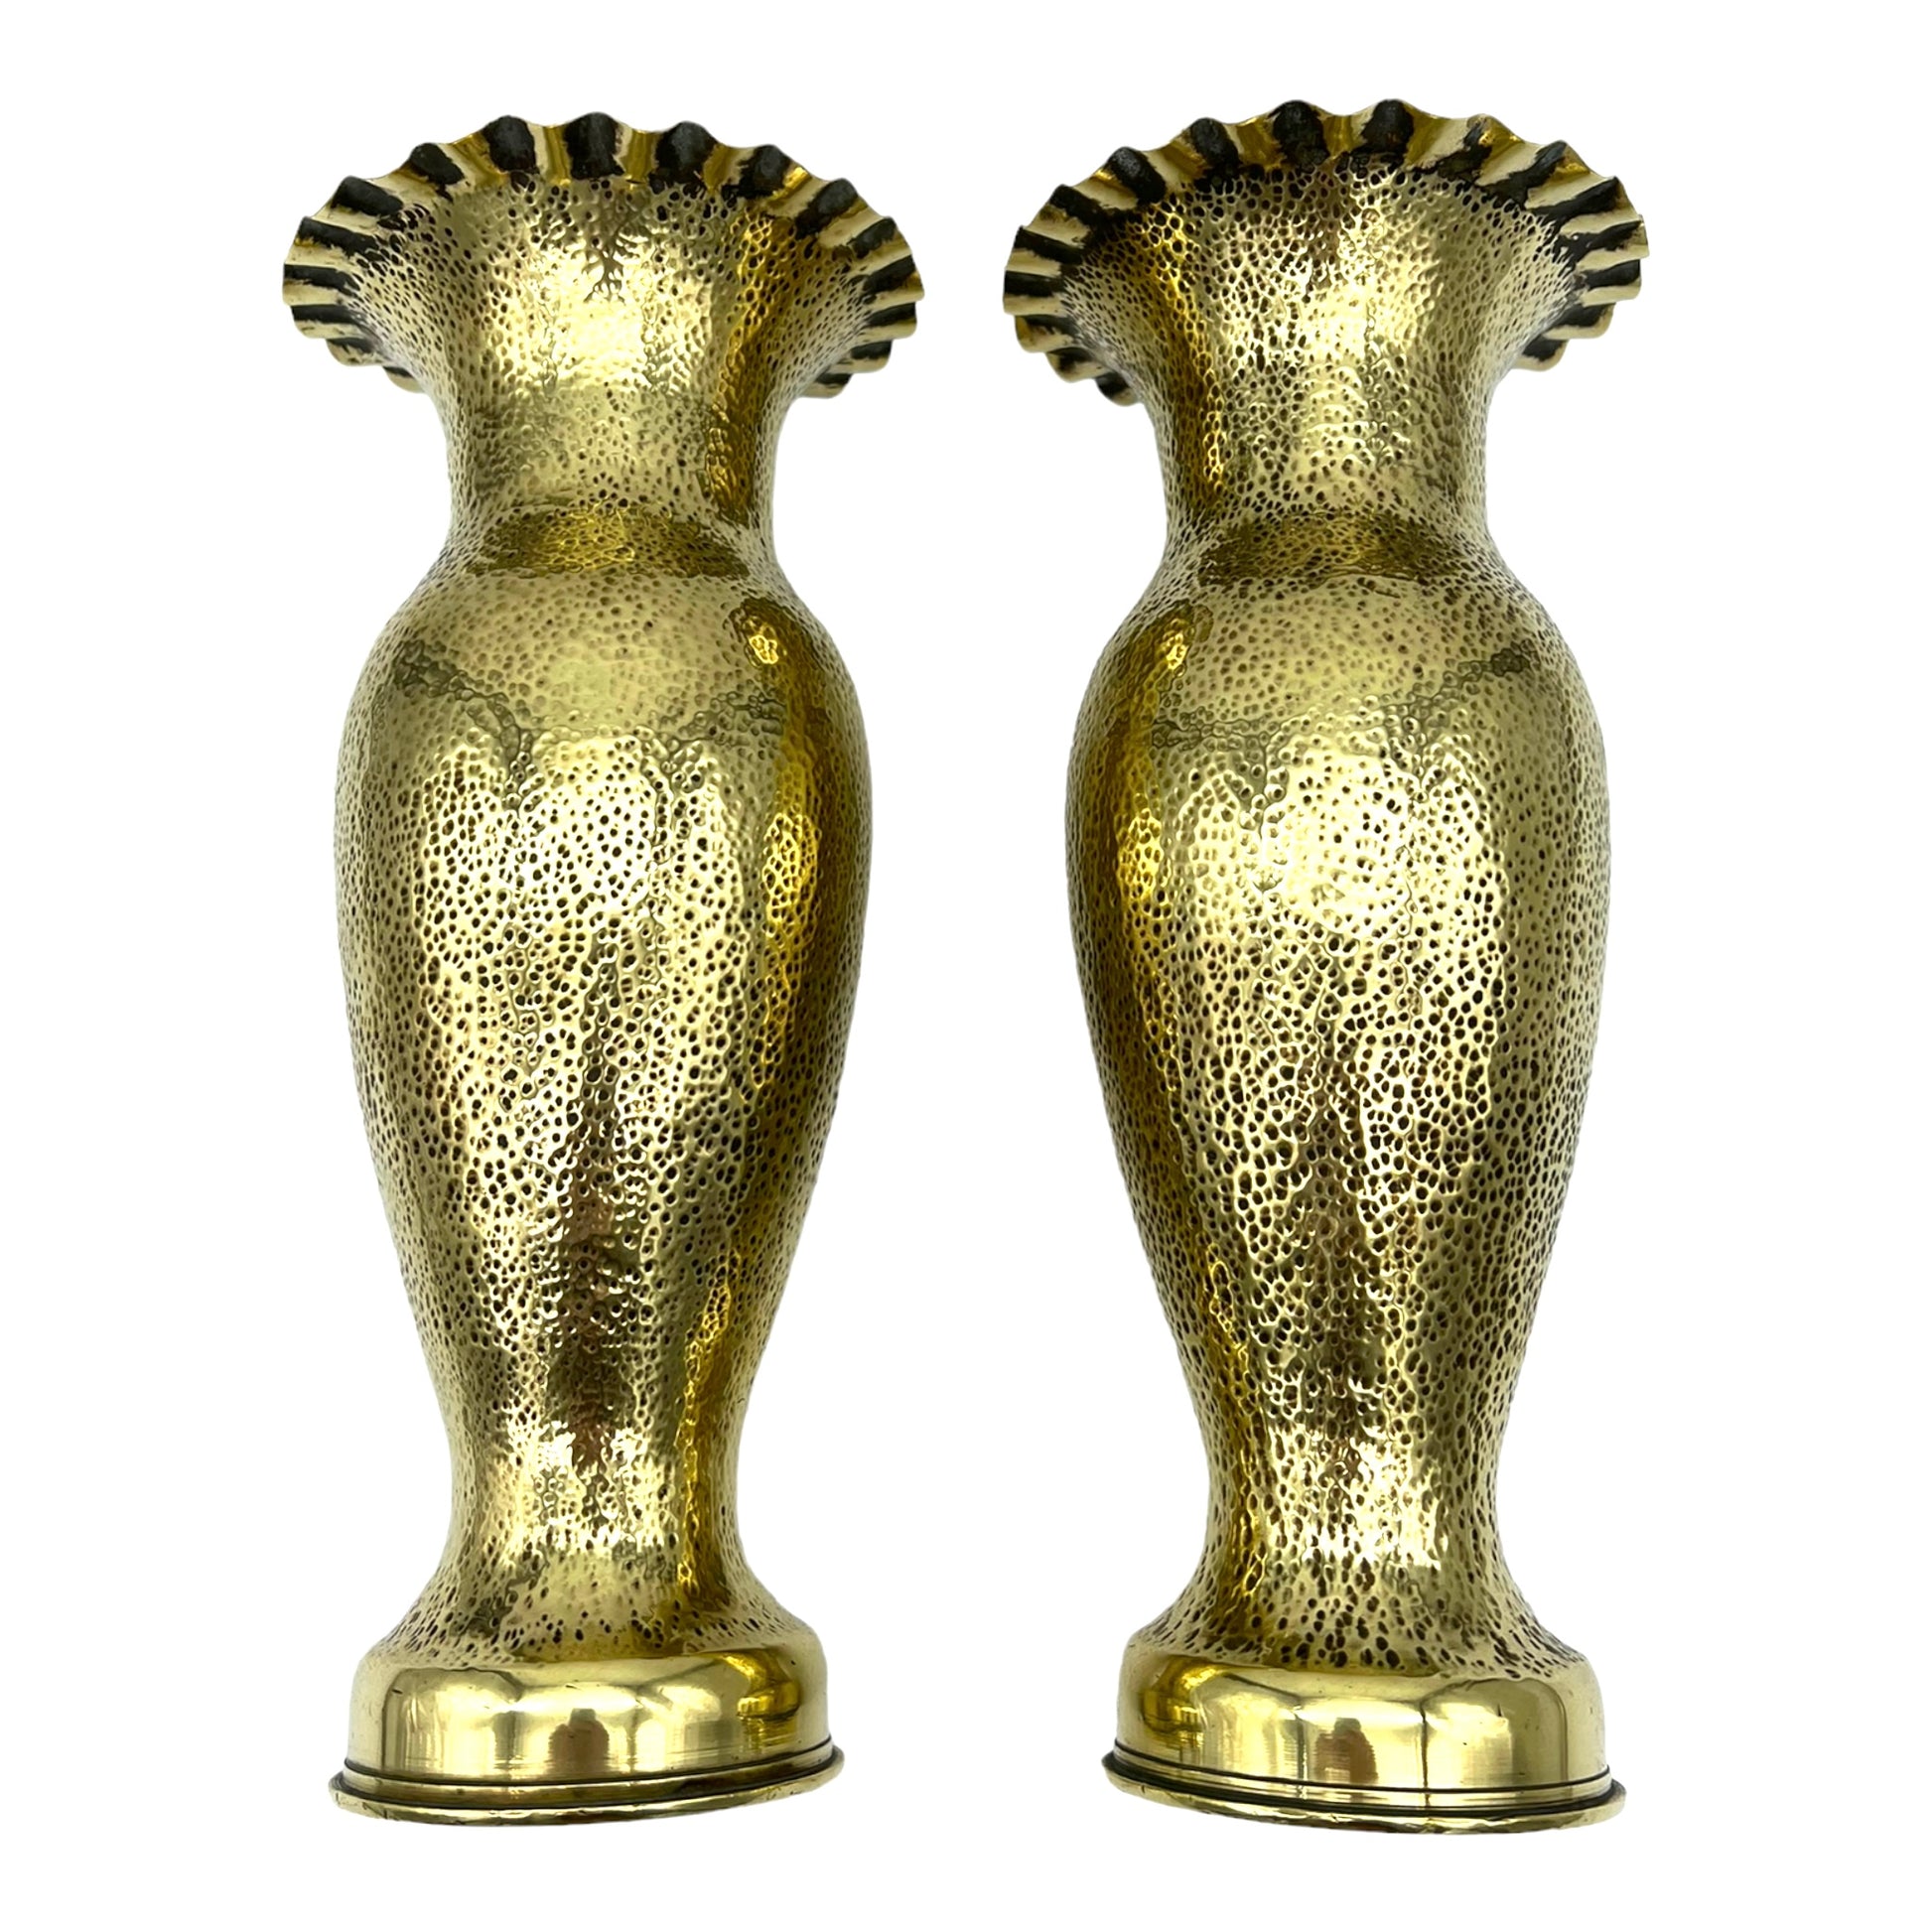 Pair of French WW1 trench art brass vases sold by All Things French Store